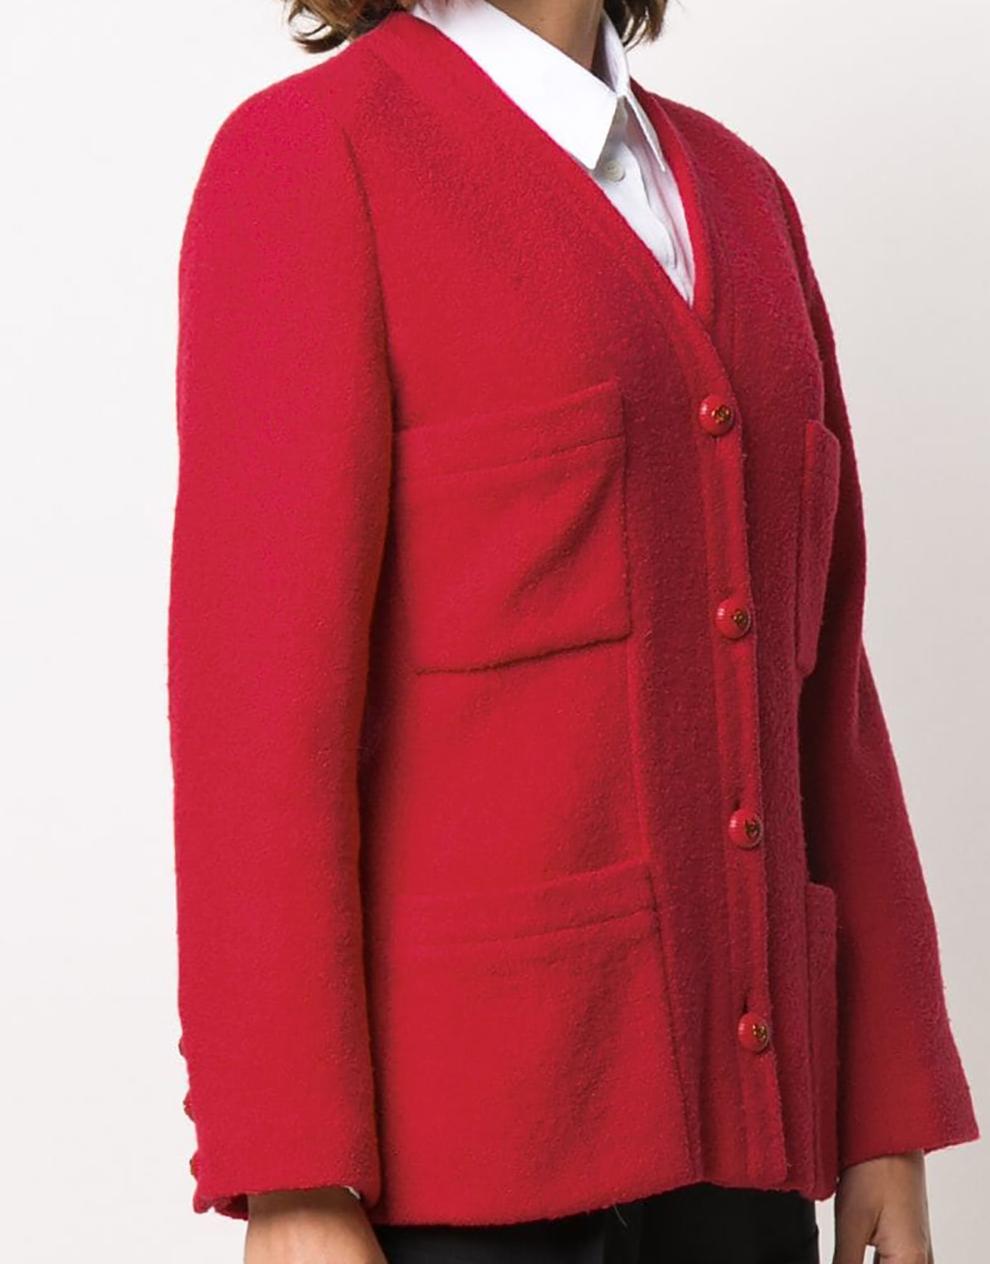 Chanel Red Strawberry Boucle Tweed Jacket 1